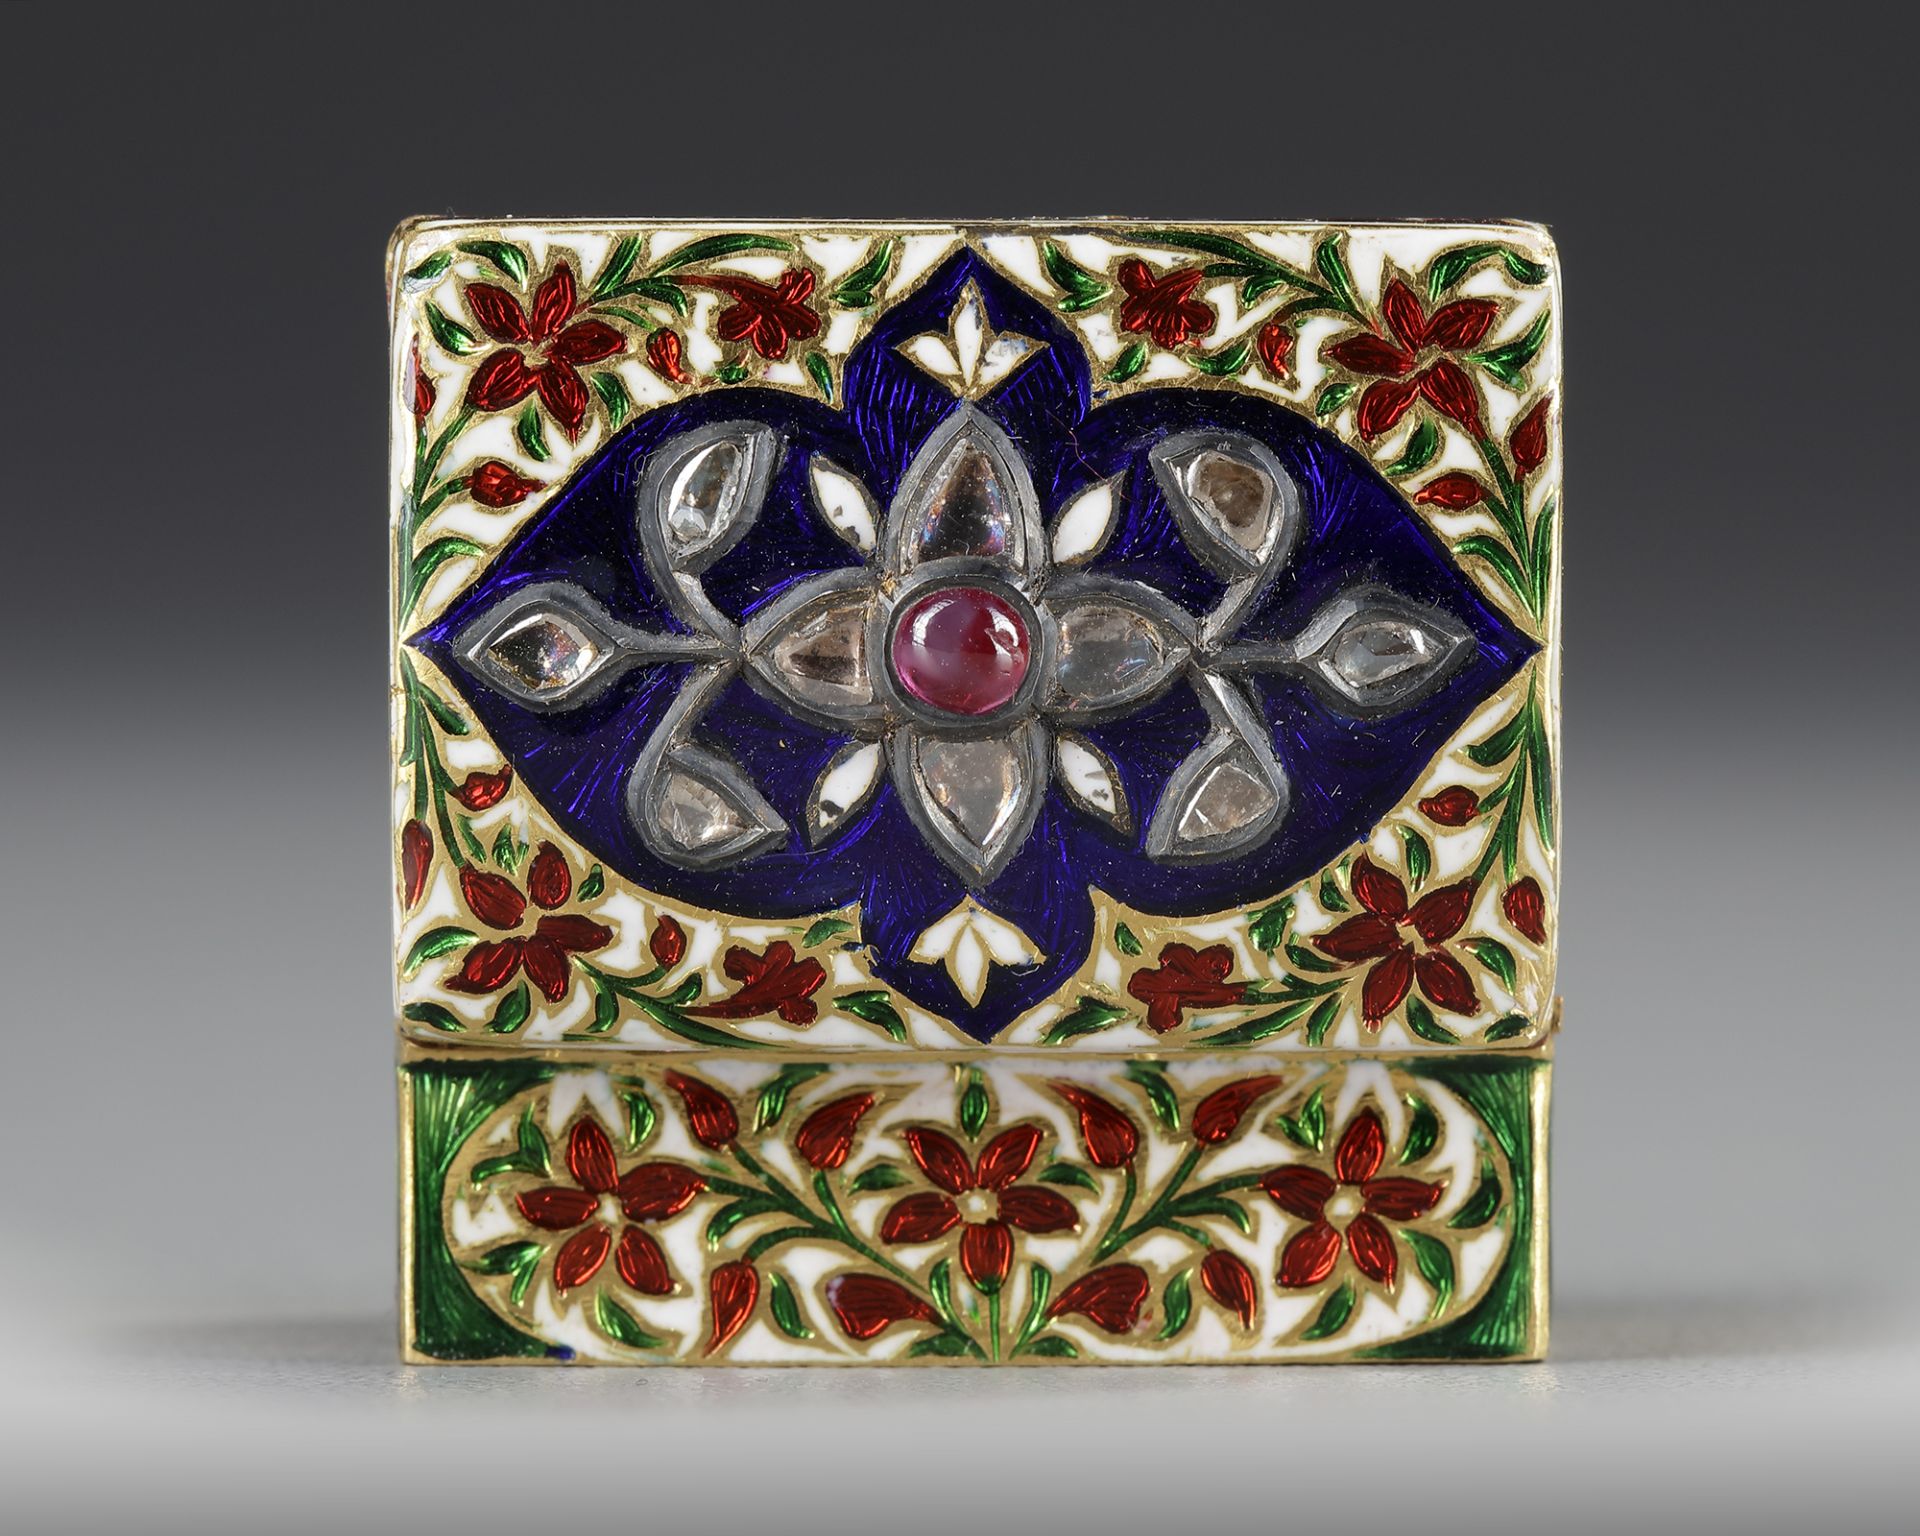 AN INDIAN, JAIPUR, RAJASTHAN ENAMEL, POLKI DIAMOND AND RUBY BOX, FIRST HALF OF THE 20TH CENTURY - Image 3 of 4